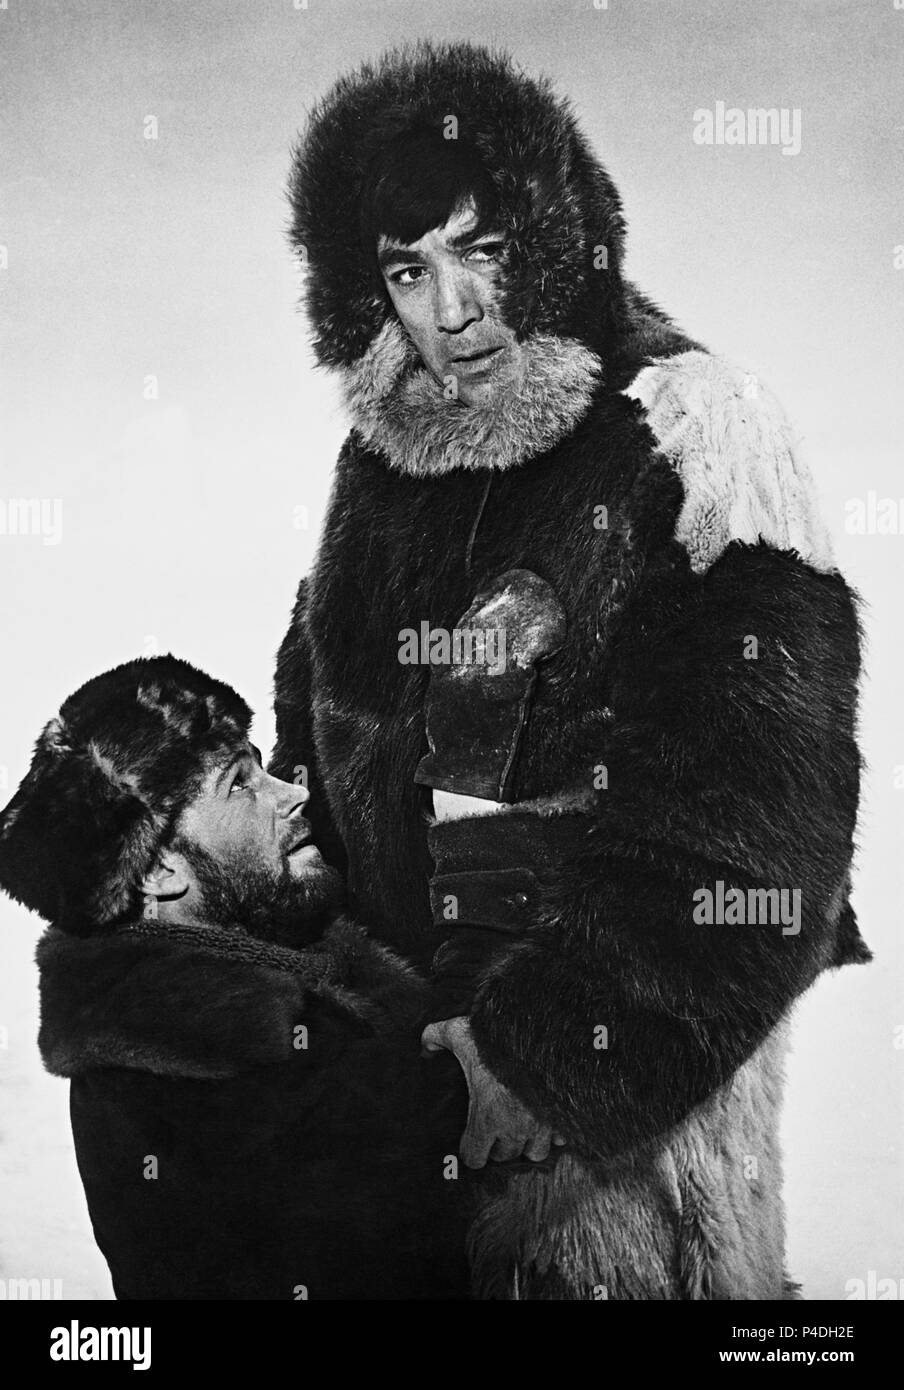 Original Film Title: THE SAVAGE INNOCENTS.  English Title: THE SAVAGE INNOCENTS.  Film Director: NICHOLAS RAY.  Year: 1960.  Stars: ANTHONY QUINN; PETER O'TOOLE. Credit: PARAMOUNT PICTURES / Album Stock Photo